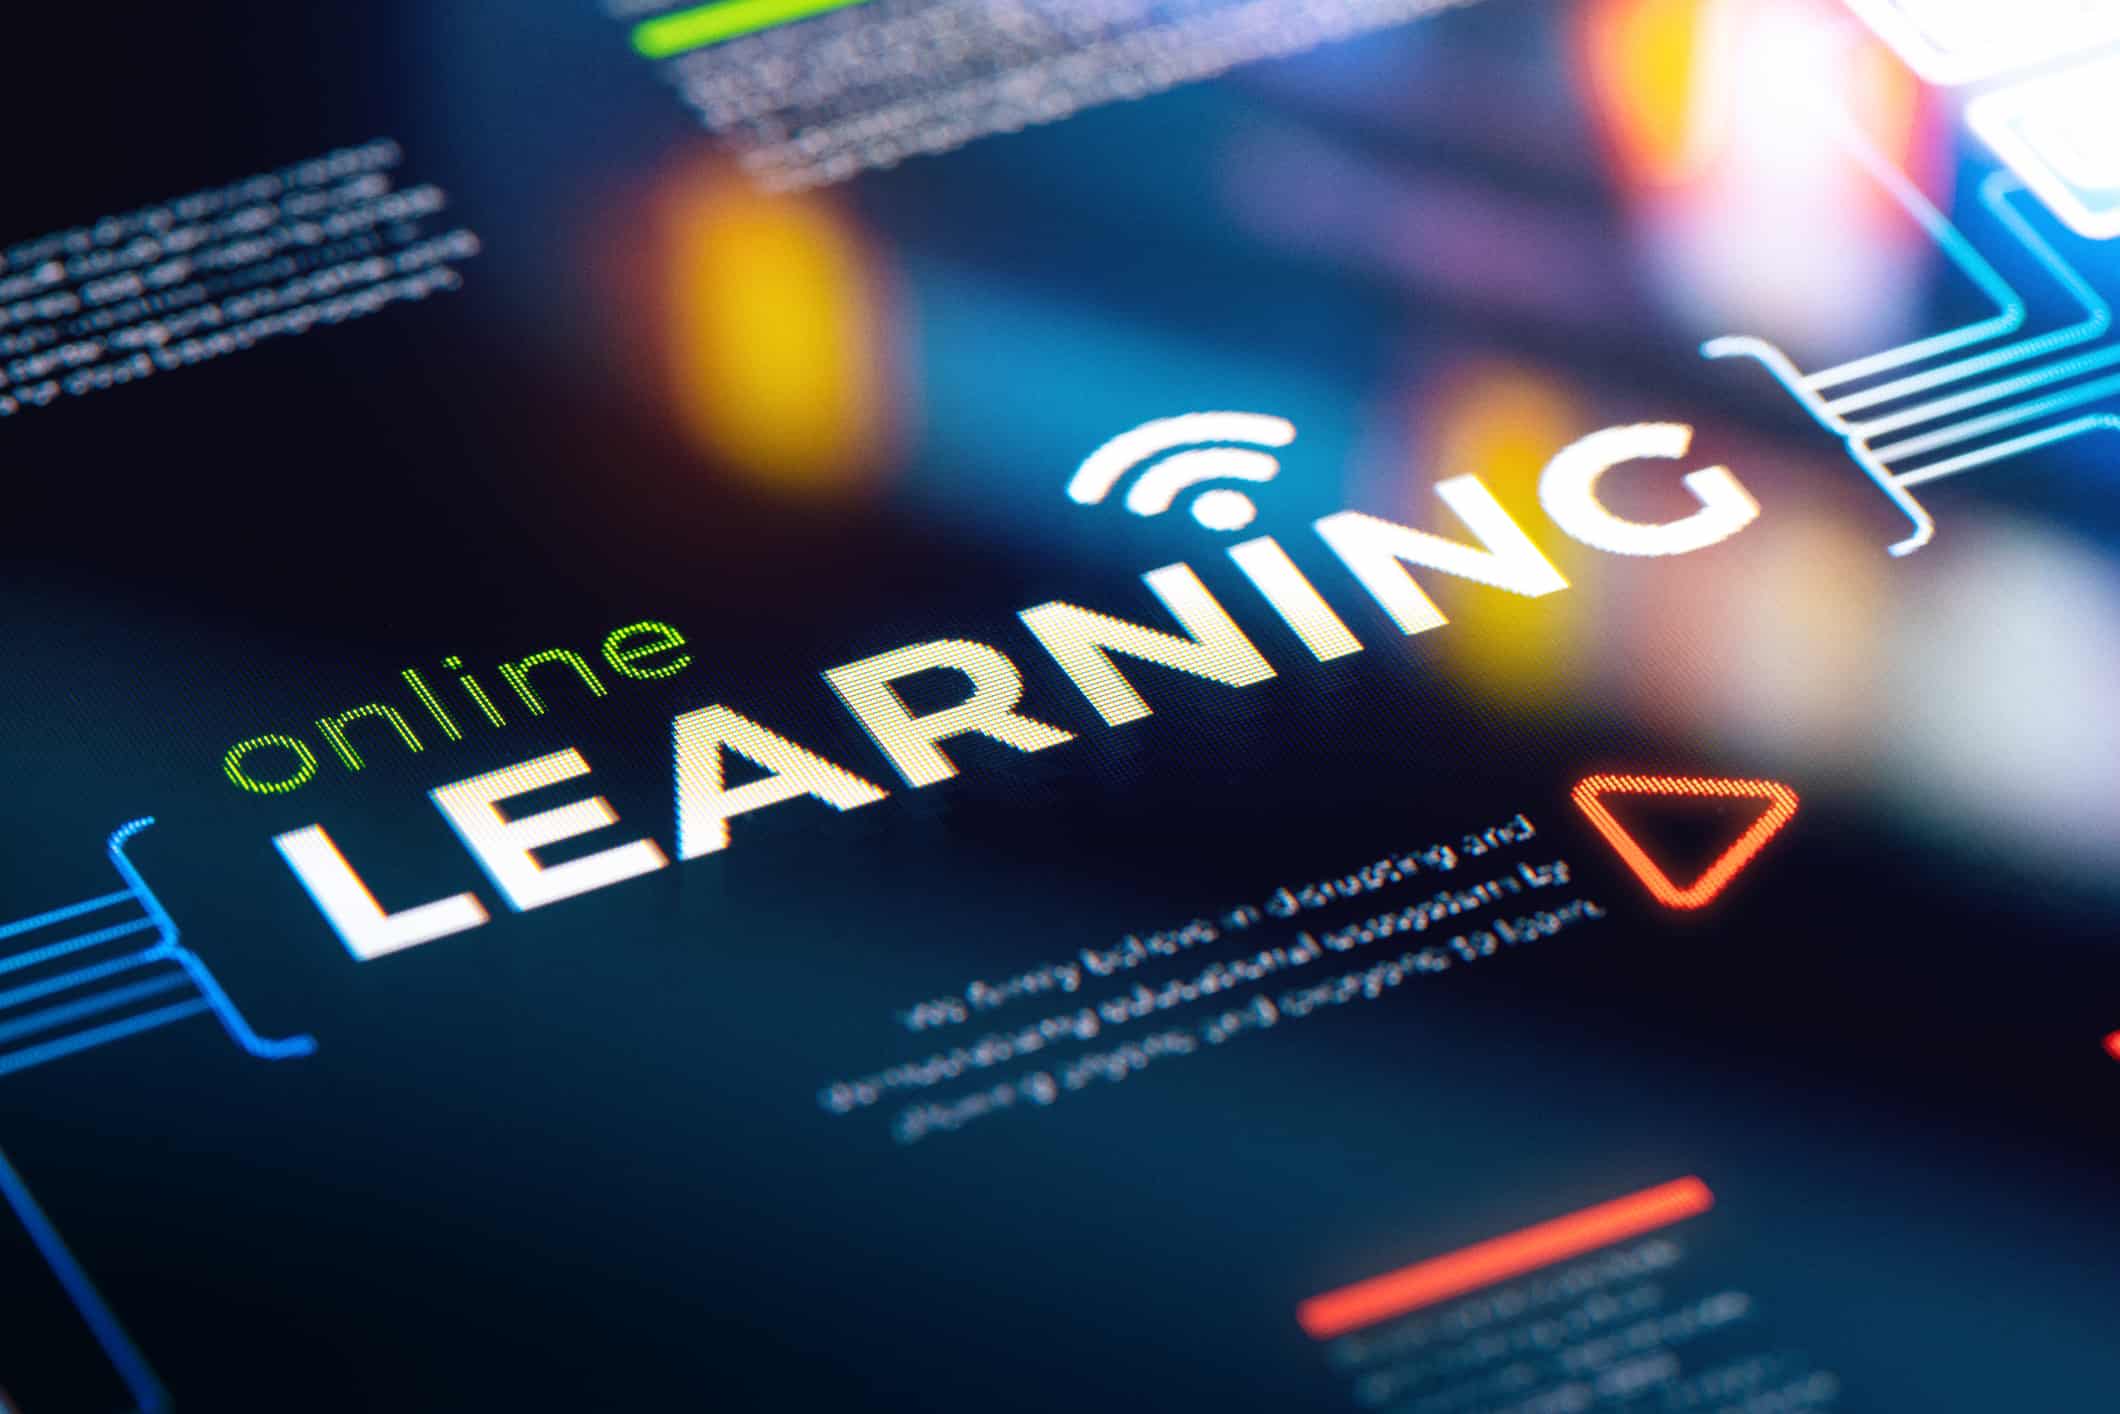 Online Learning Course